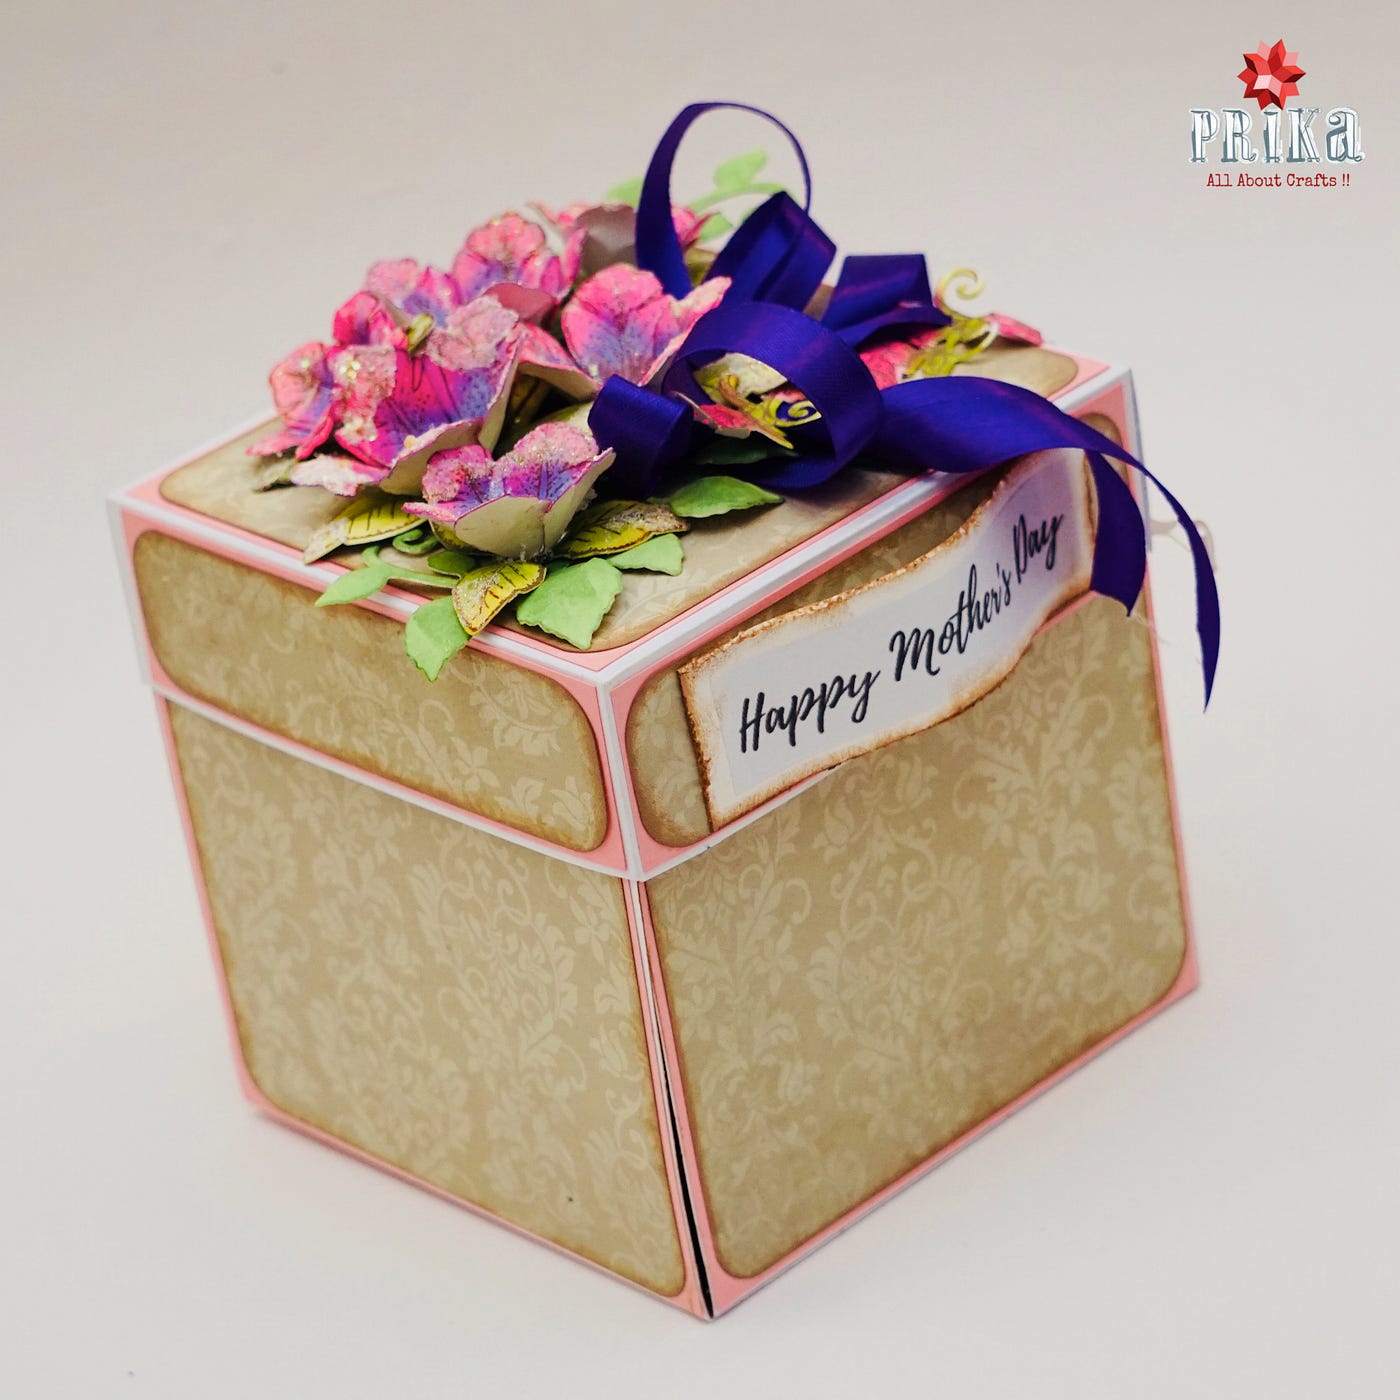 Beginner's Guide to Paper Mache. Here we bring you some more simple…, by  Priyanka Singh, Prika